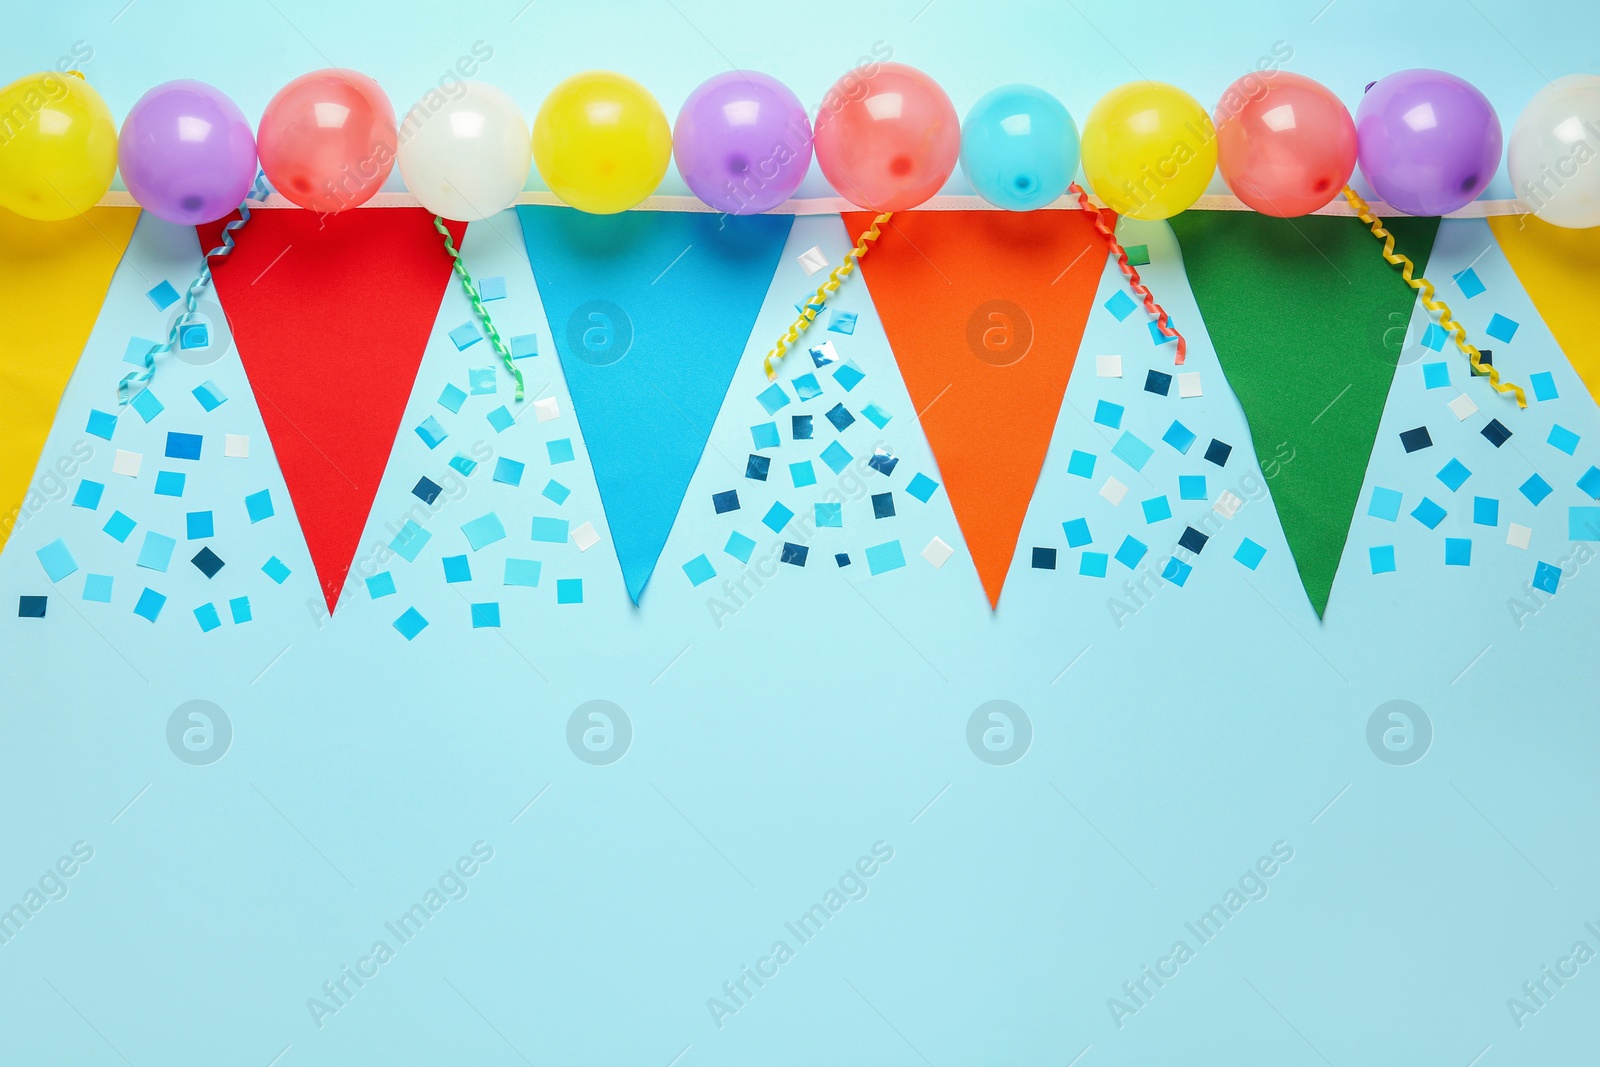 Photo of Bunting with colorful triangular flags and other festive decor on light blue background, flat lay. Space for text